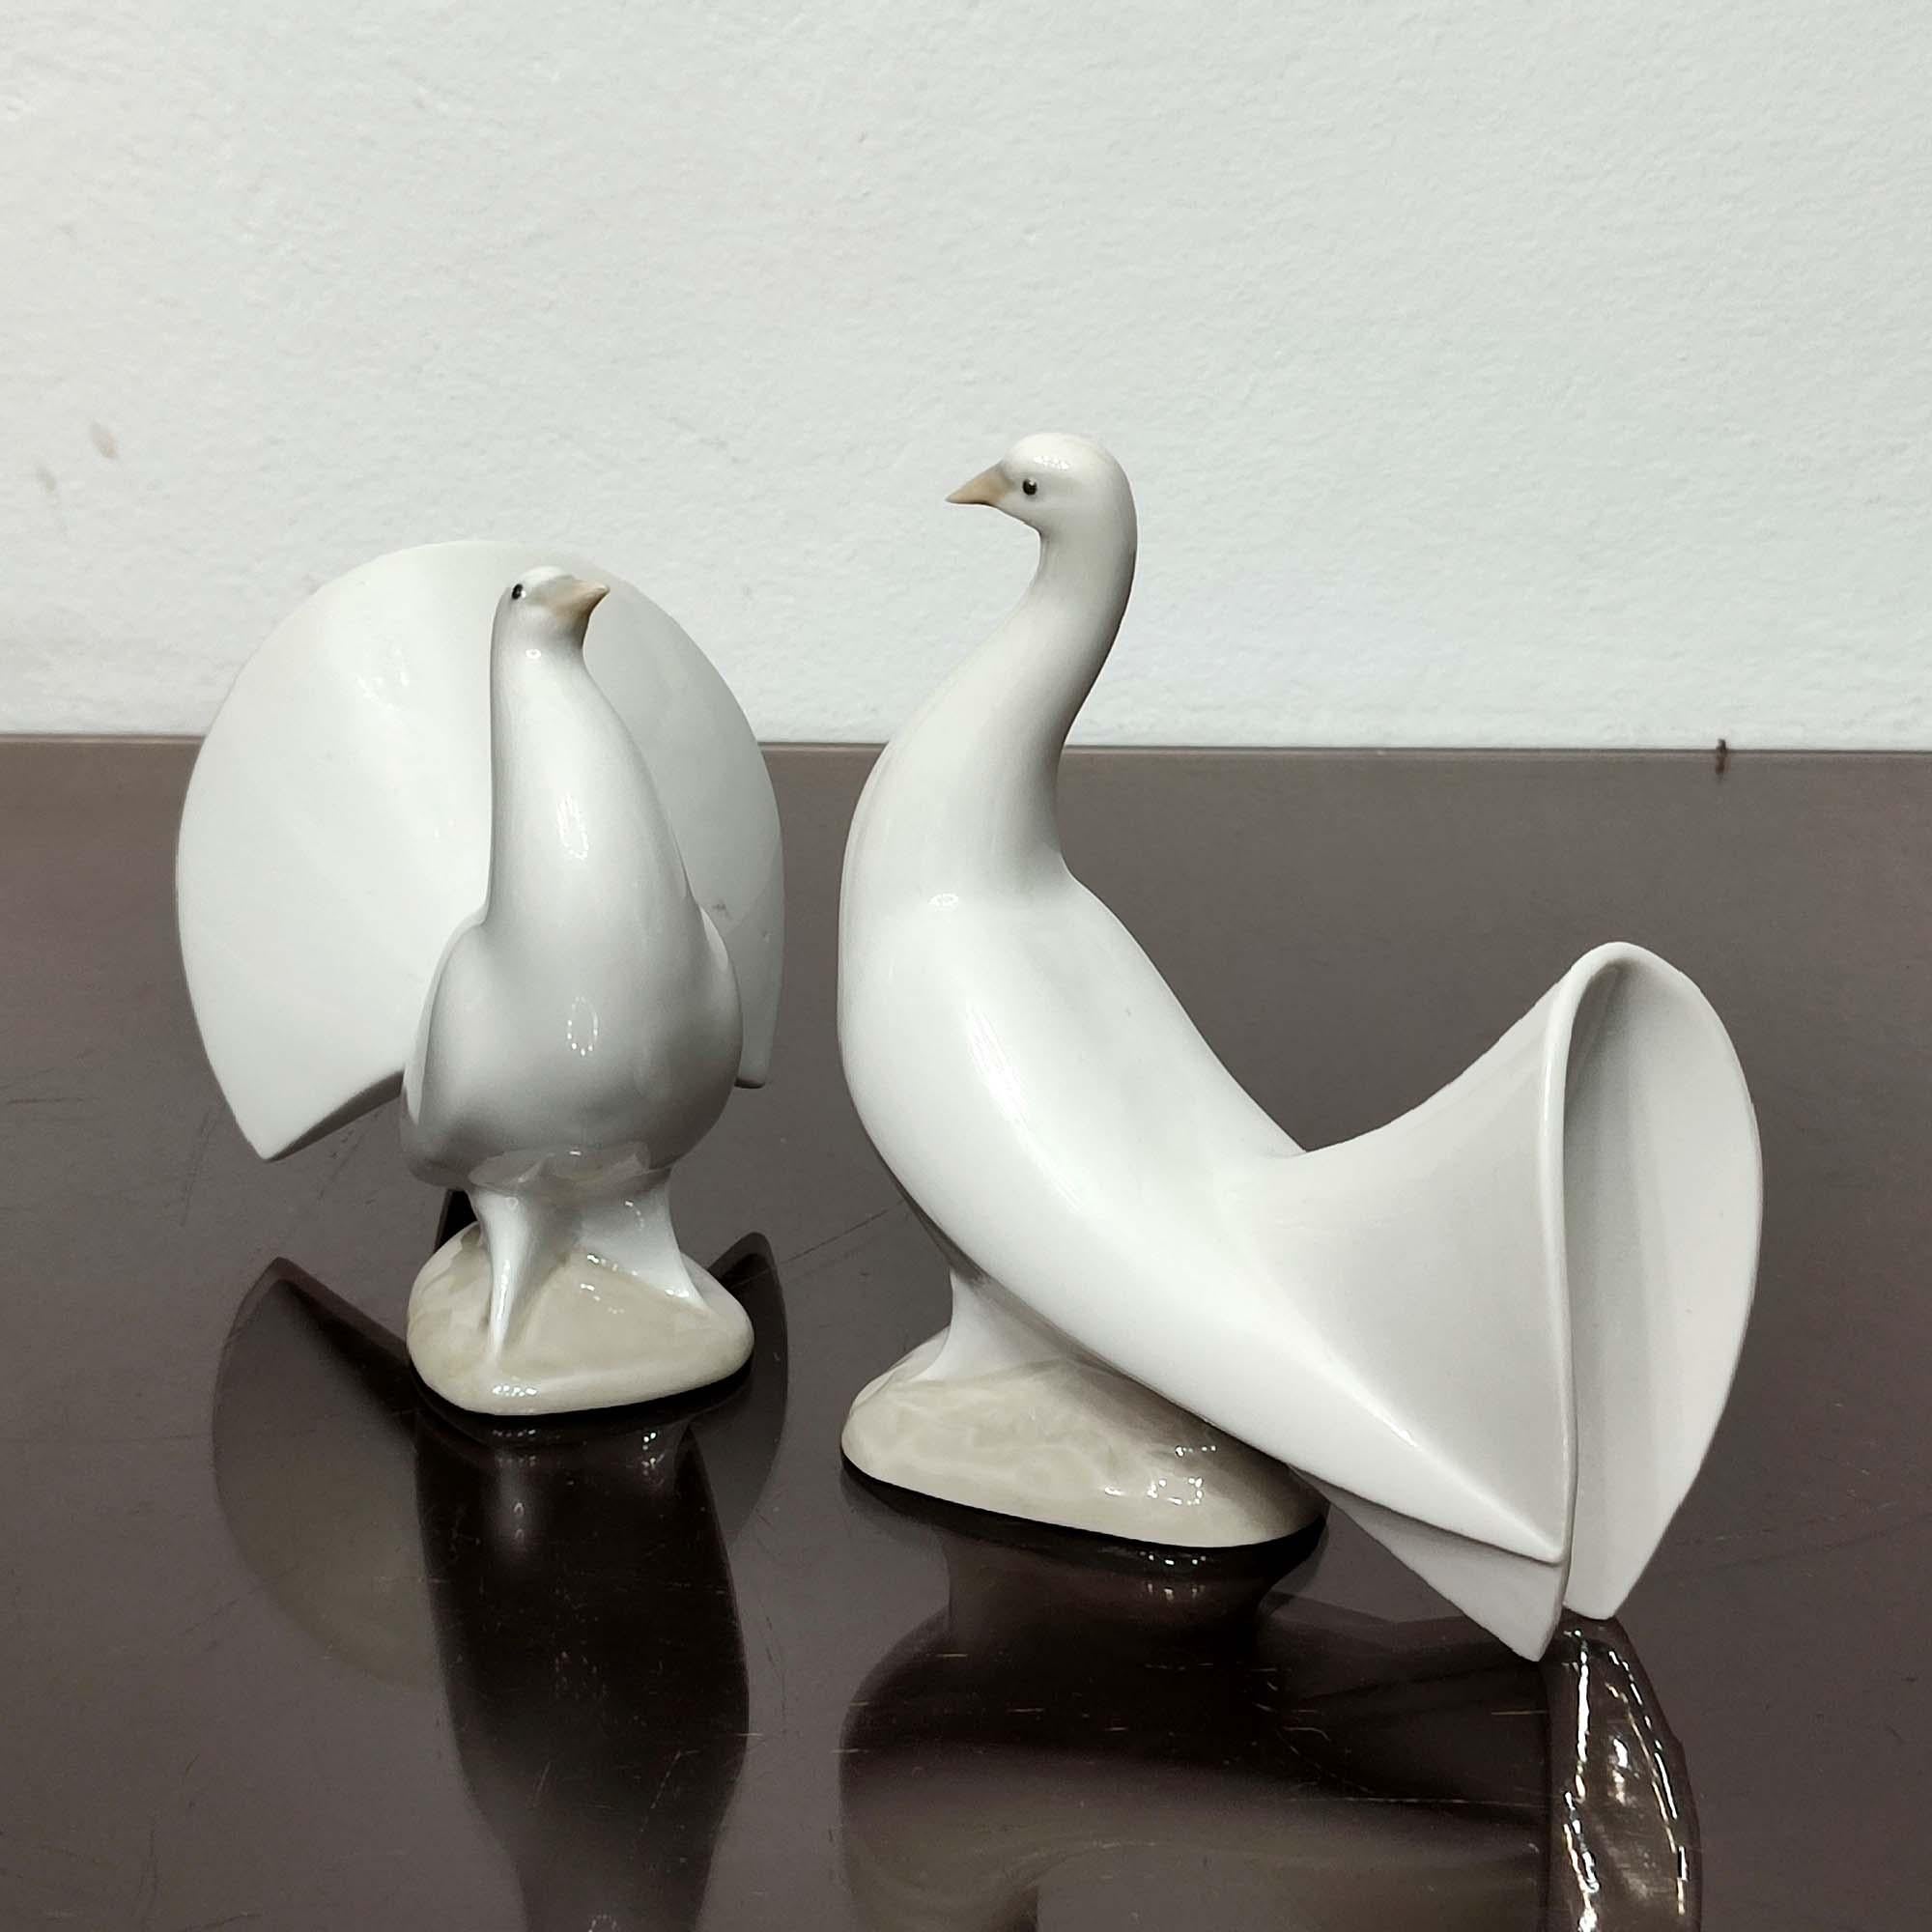 Glazed Beautiful Pair of Porcelain Doves by Nao Lladro Spain, 1970s